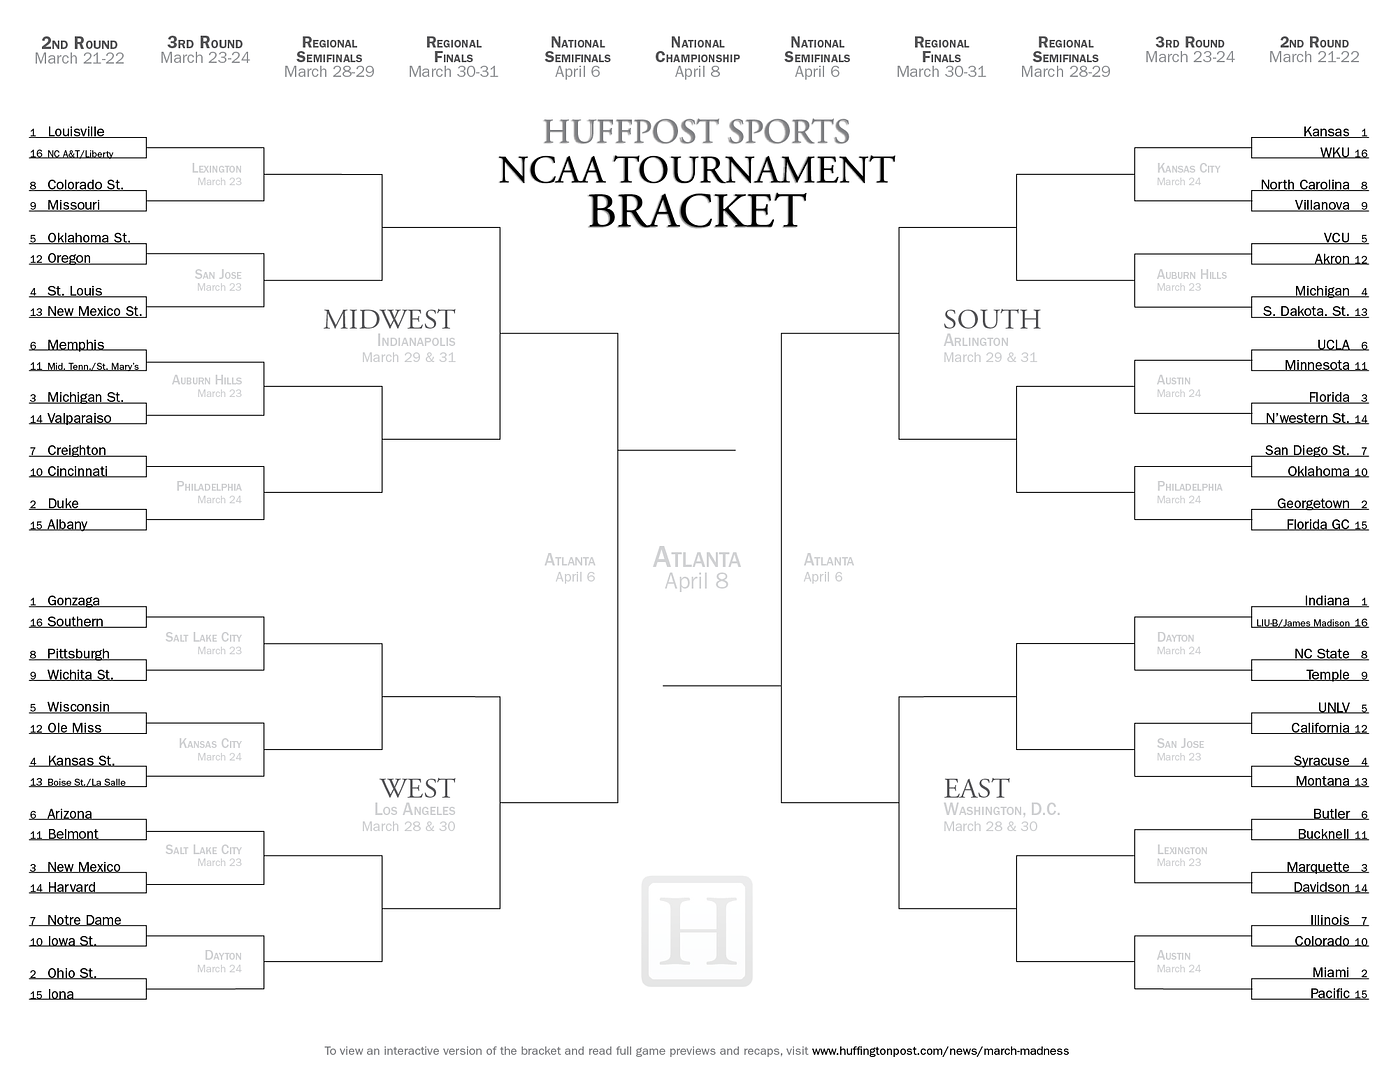 2013 NCAA Brackets photo printable-march-madness-bracket-201_zps857c16fa.png